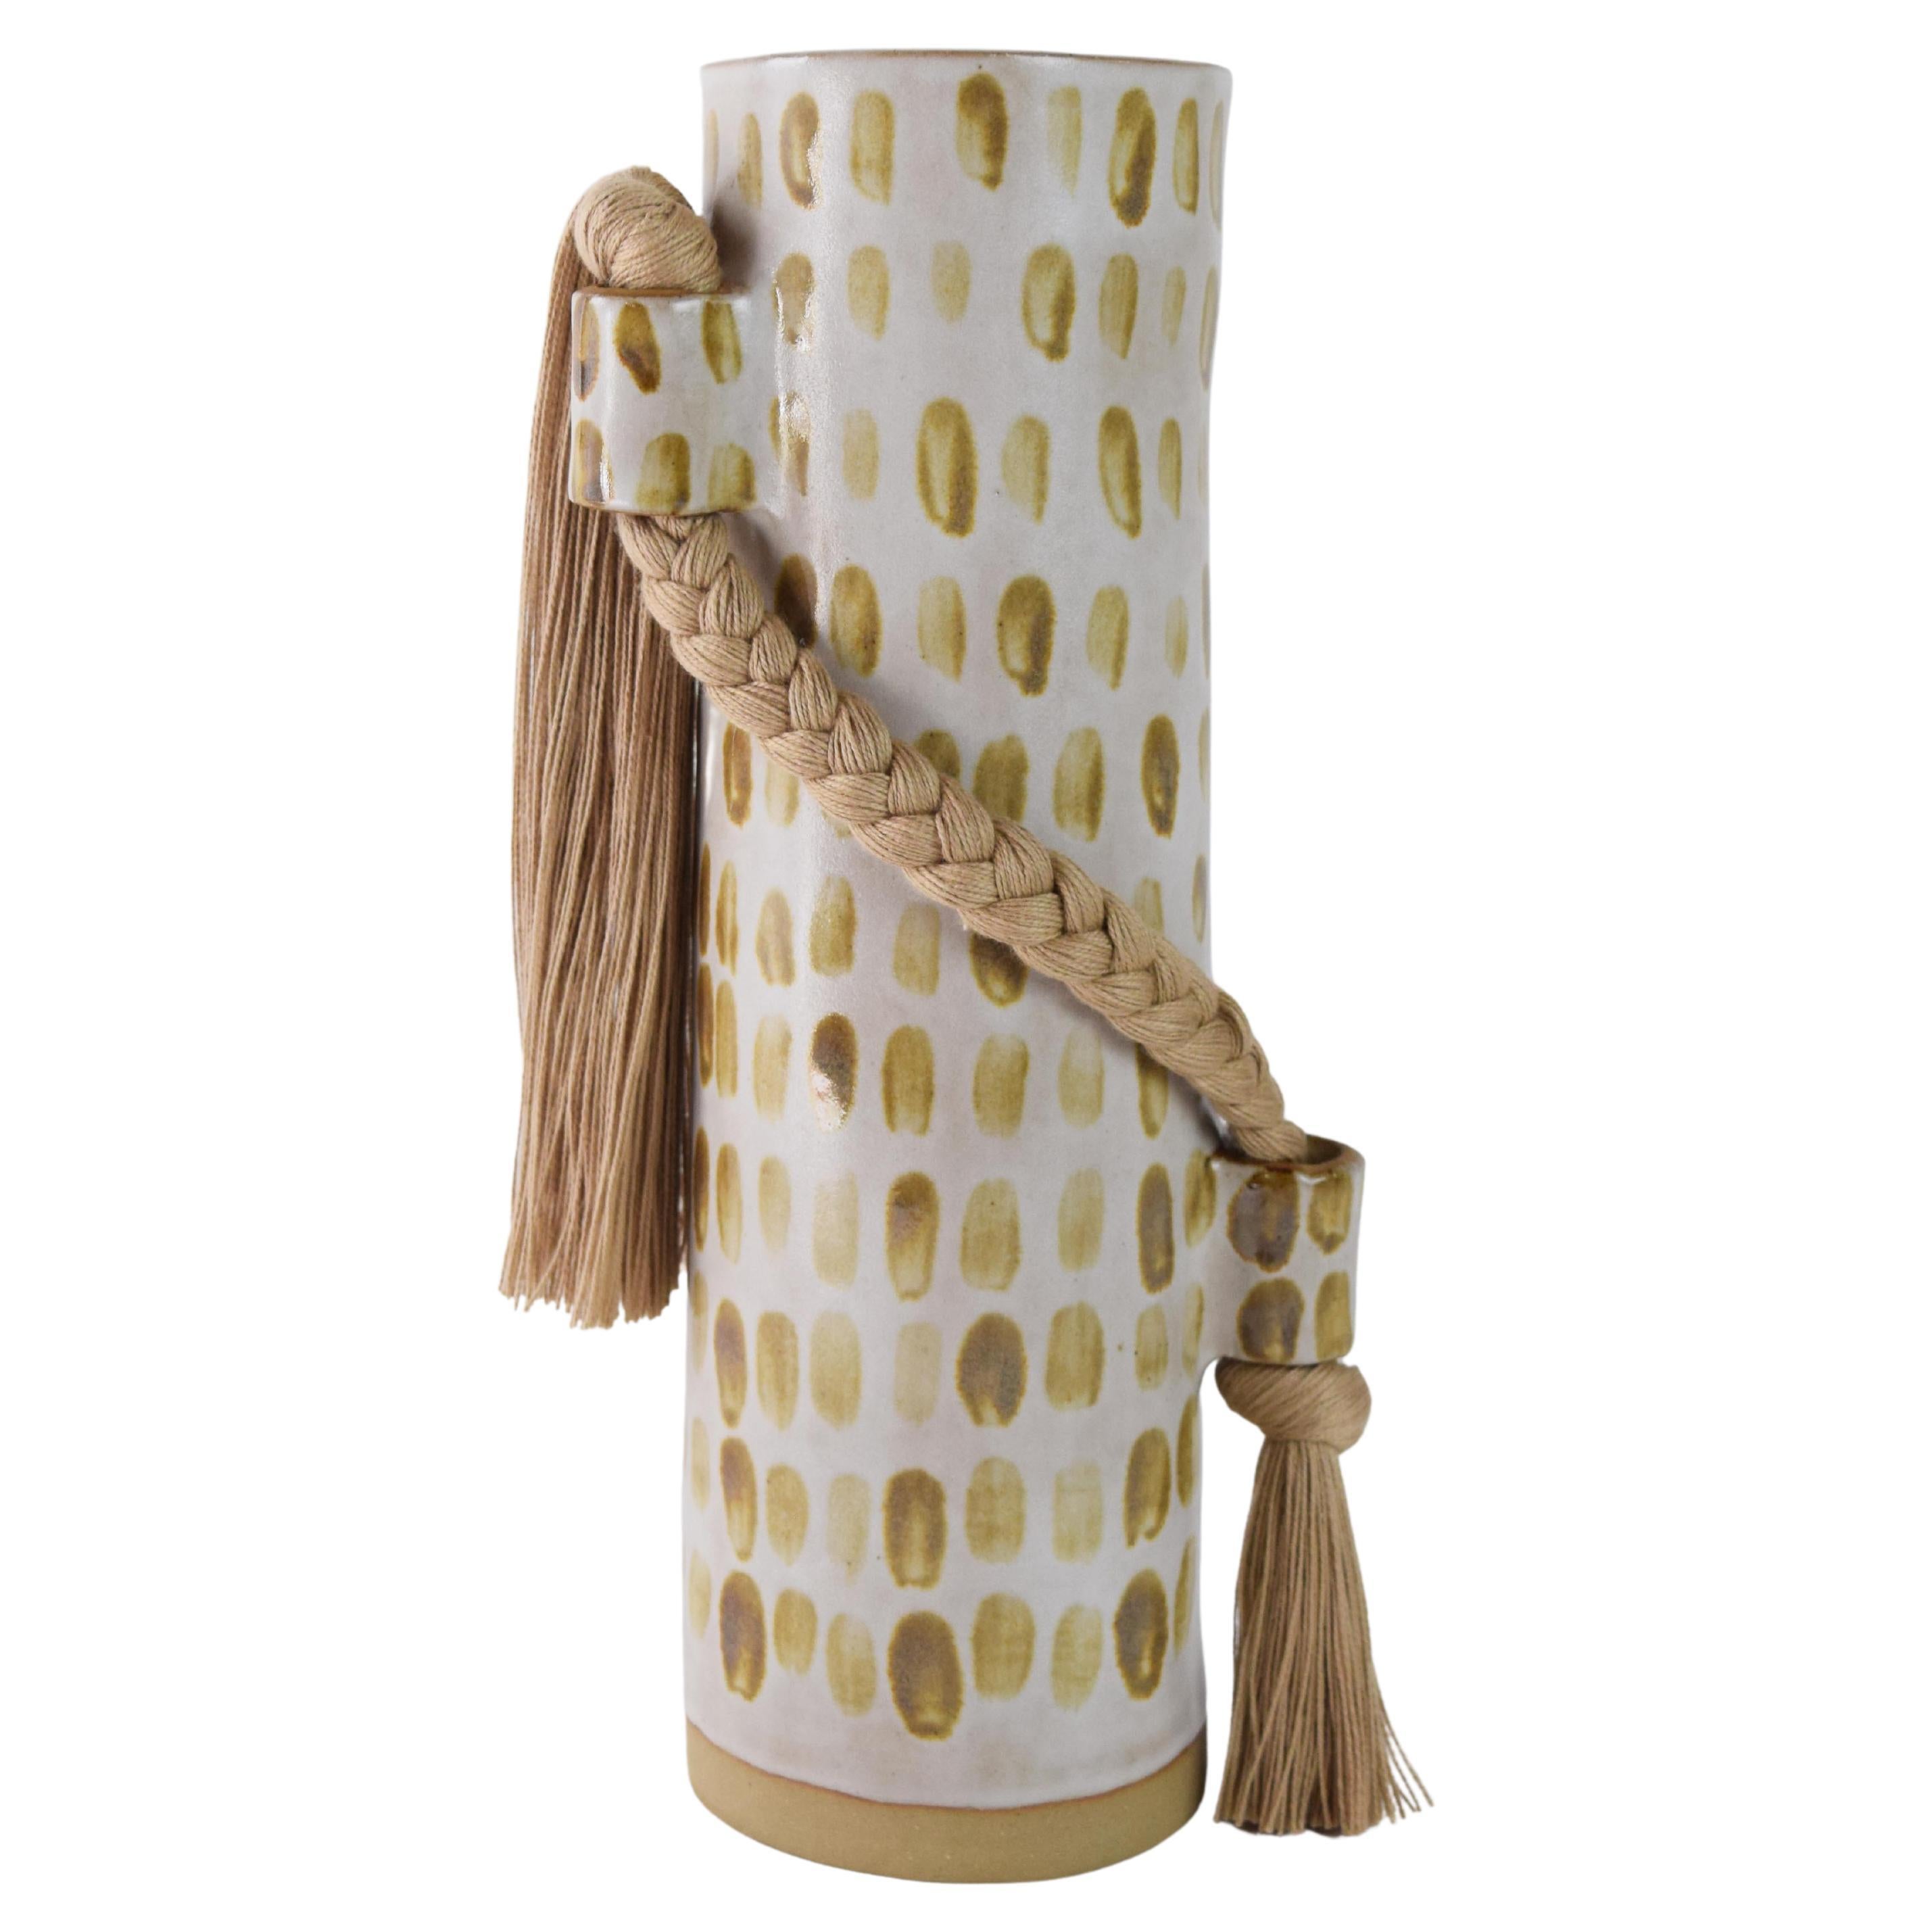 Limited Edition Handmade Vase #695, Dashed Beige on White with Tan Cotton Braid